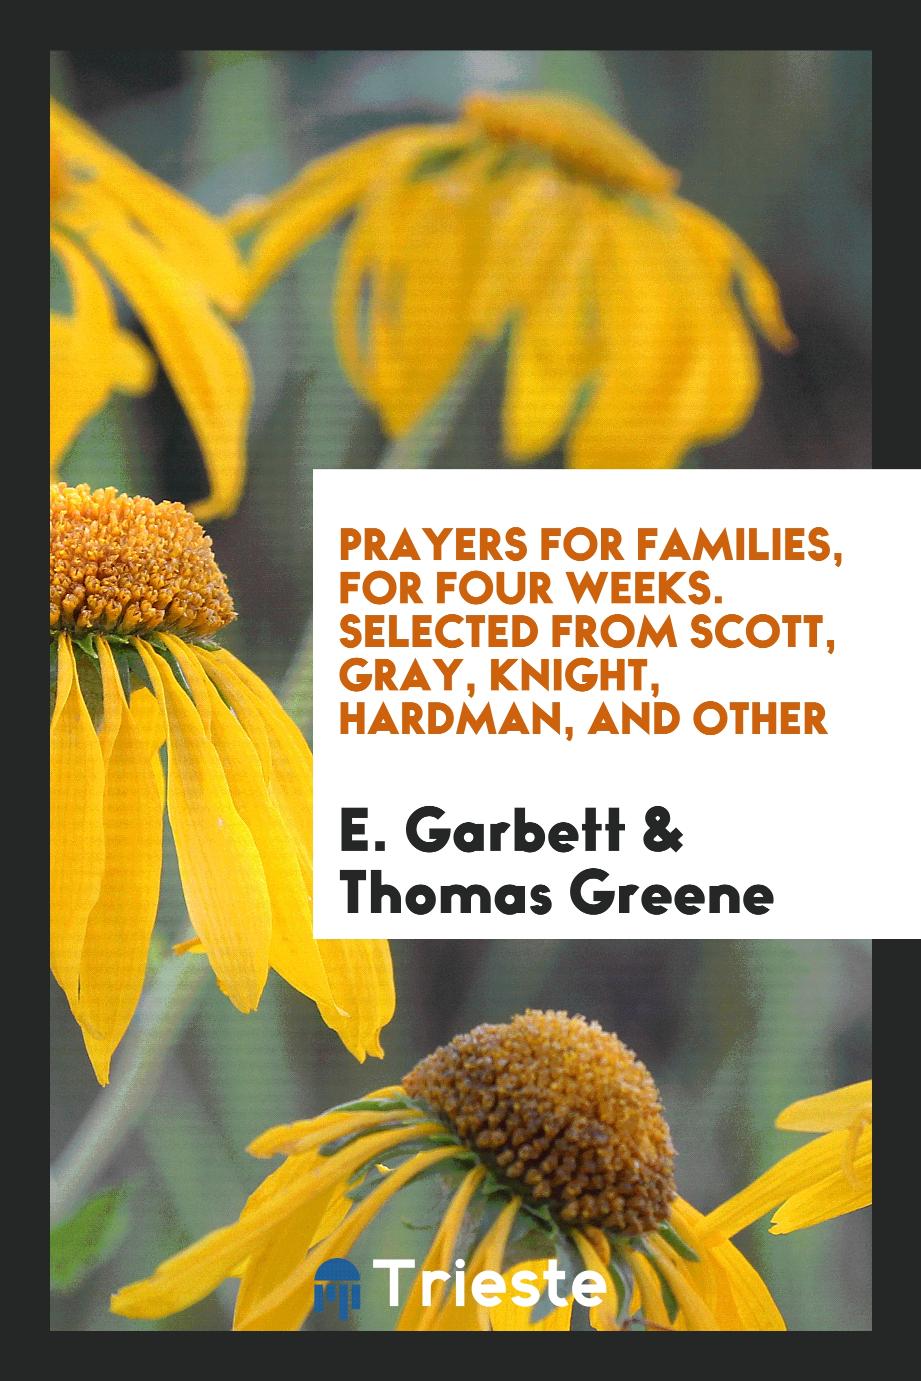 Prayers for Families, for Four Weeks. Selected from Scott, Gray, Knight, Hardman, and Other